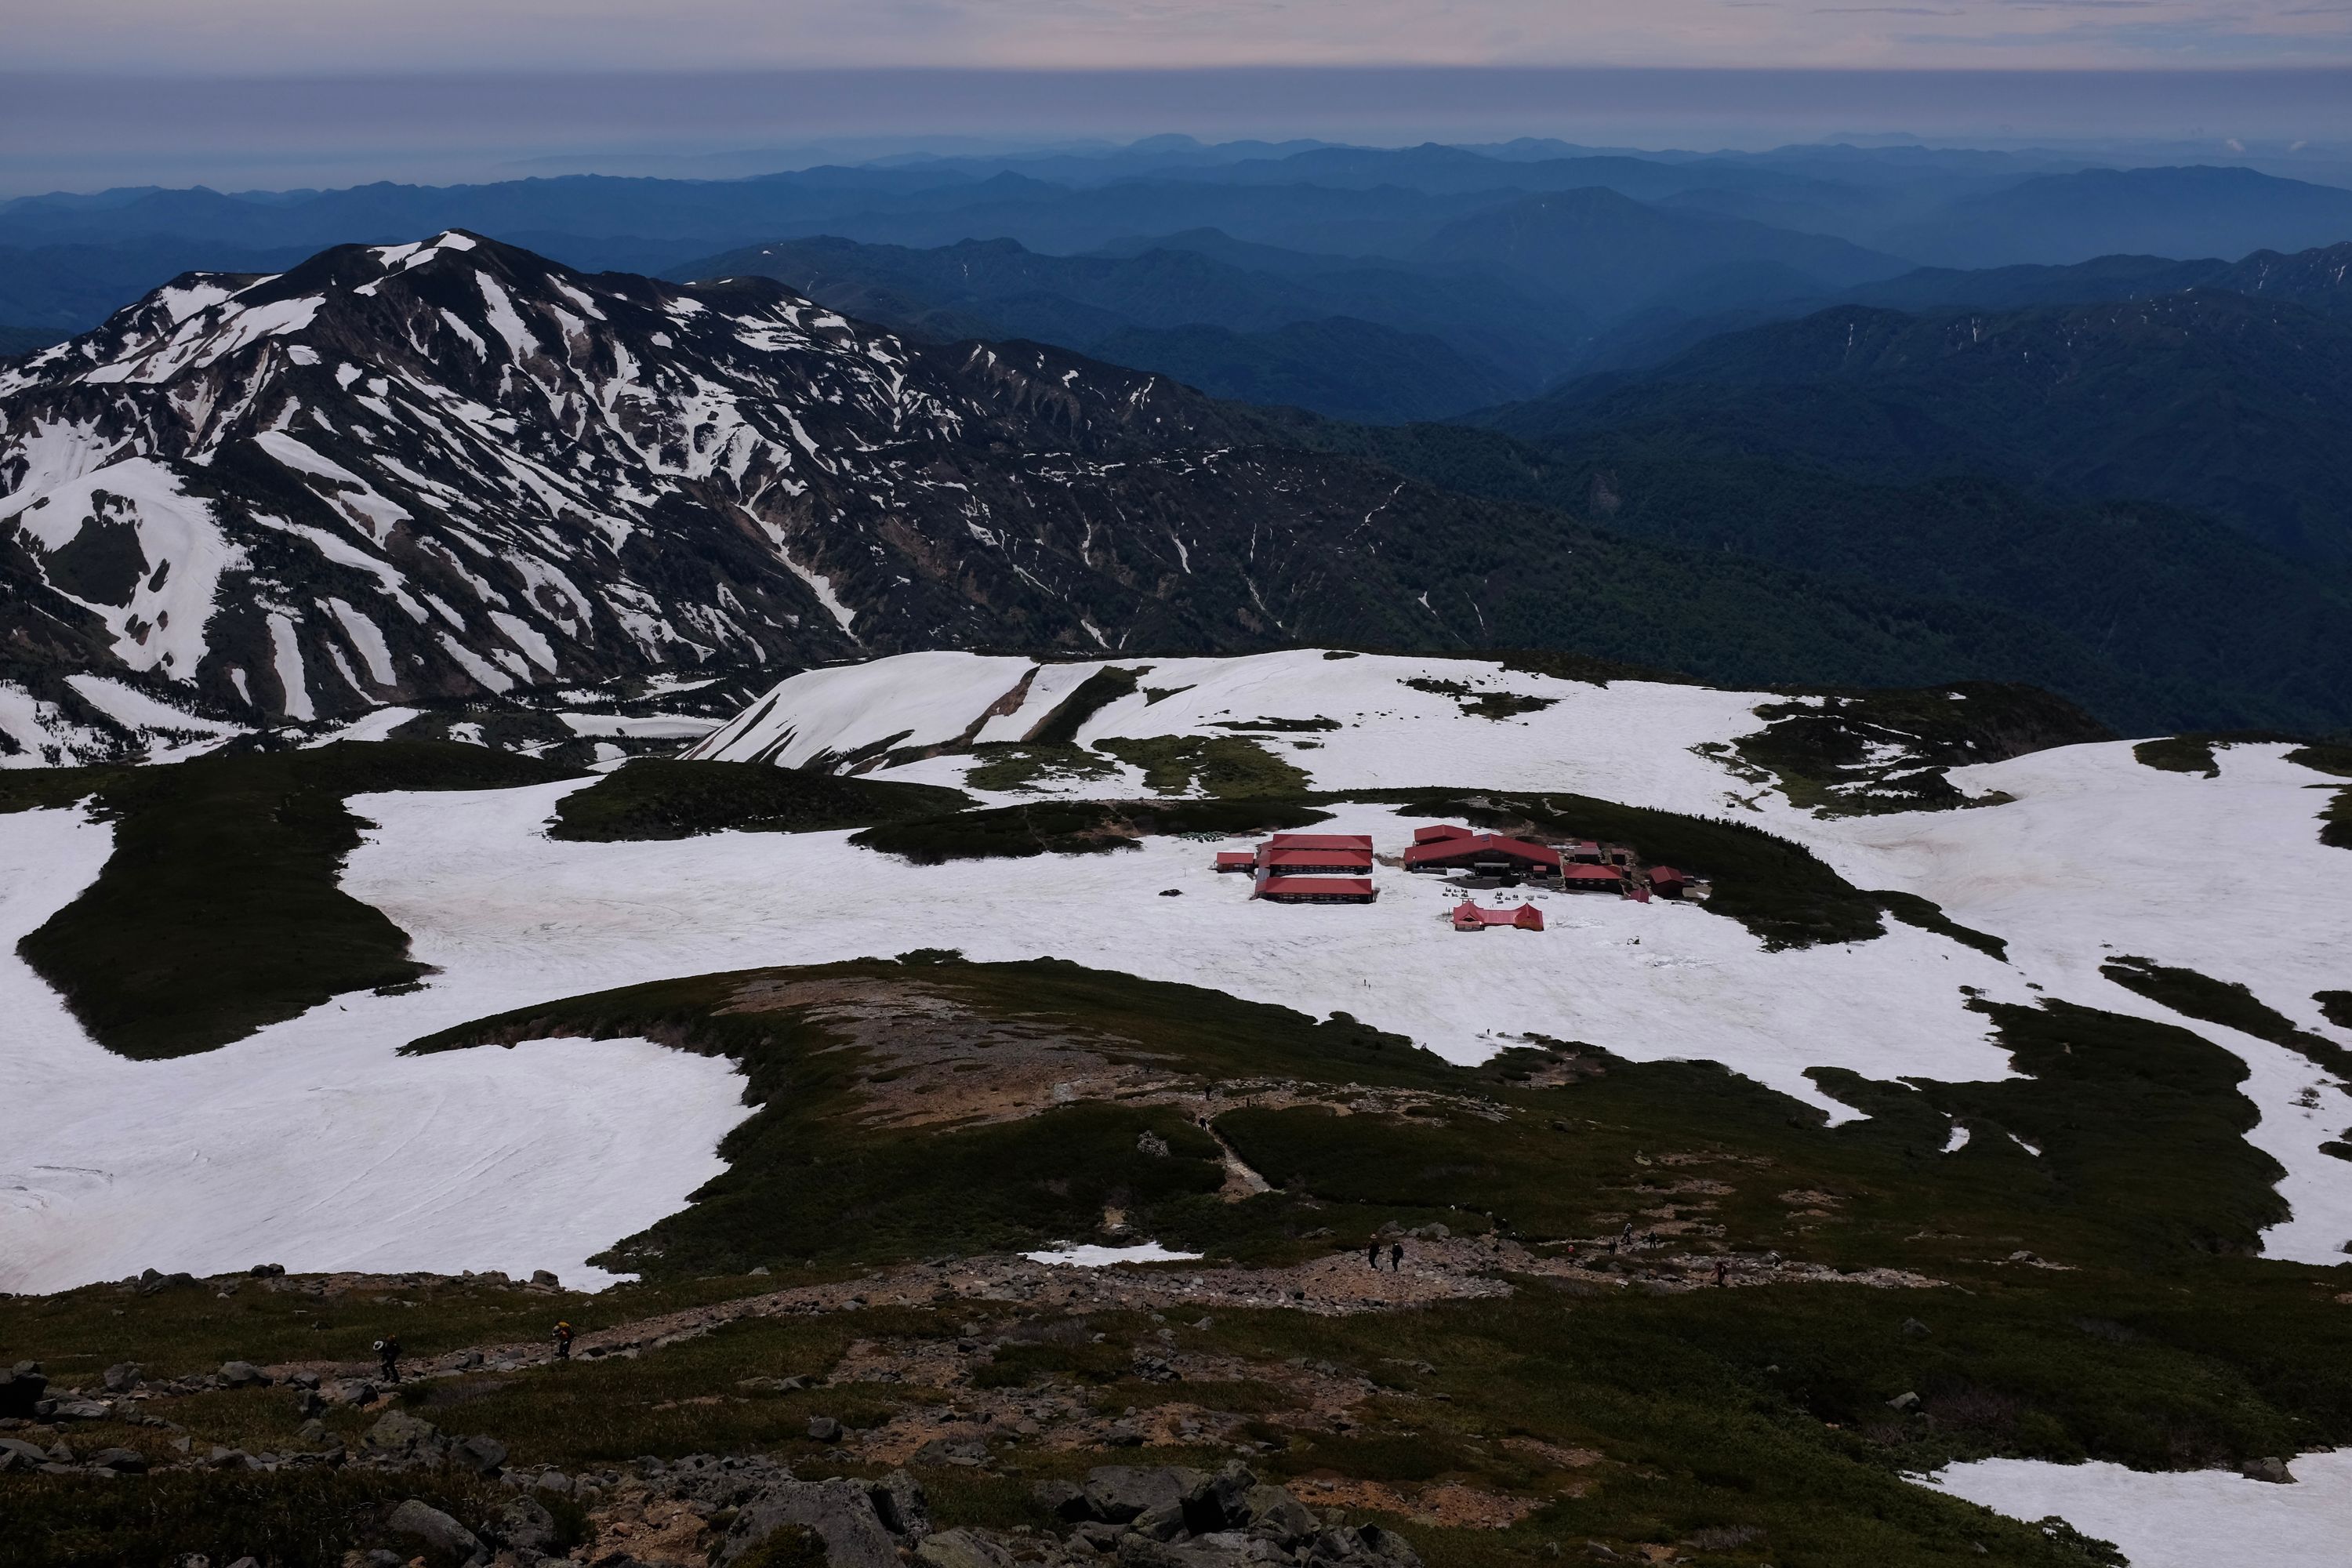 Looking down on a cluster of red-roofed mountain huts in a snowfield, behind them is a range of lower mountains.